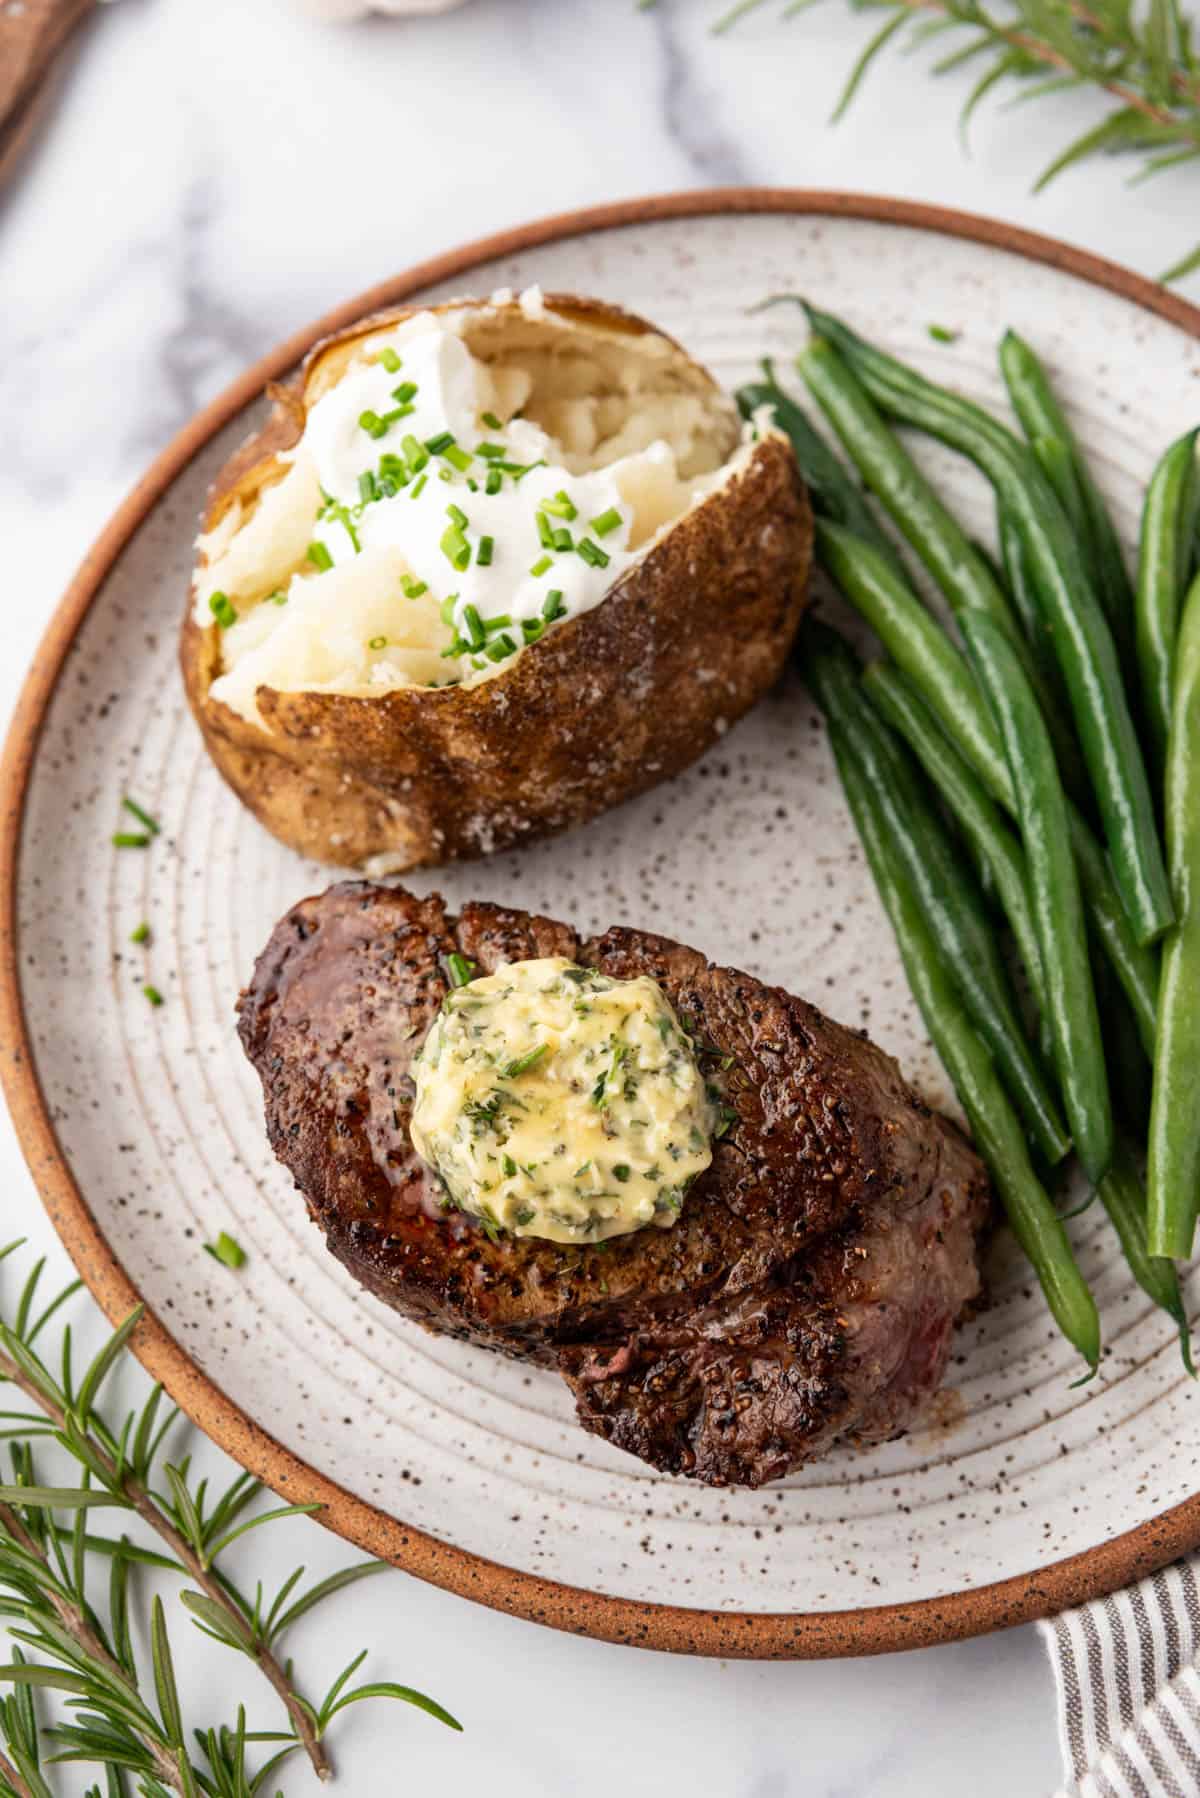 An overhead image of filet mignon on a plate with garlic herb butter, baked potato, and steamed green beans.